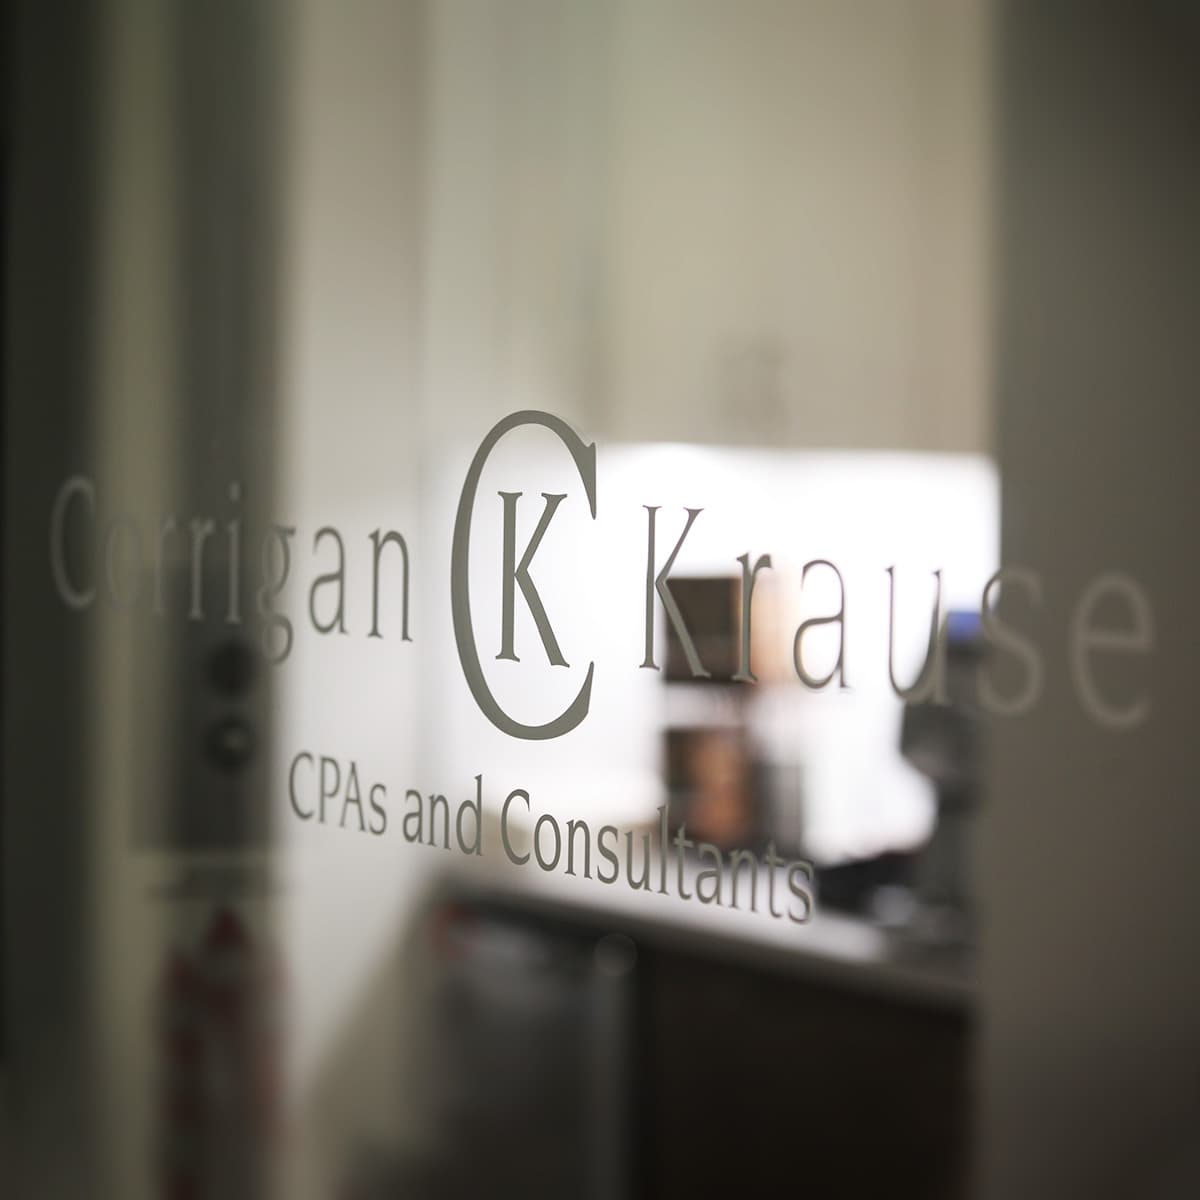 Photo of inside signage depicting the Corrigan Krause CPAs and Consultants logo on a glass pane